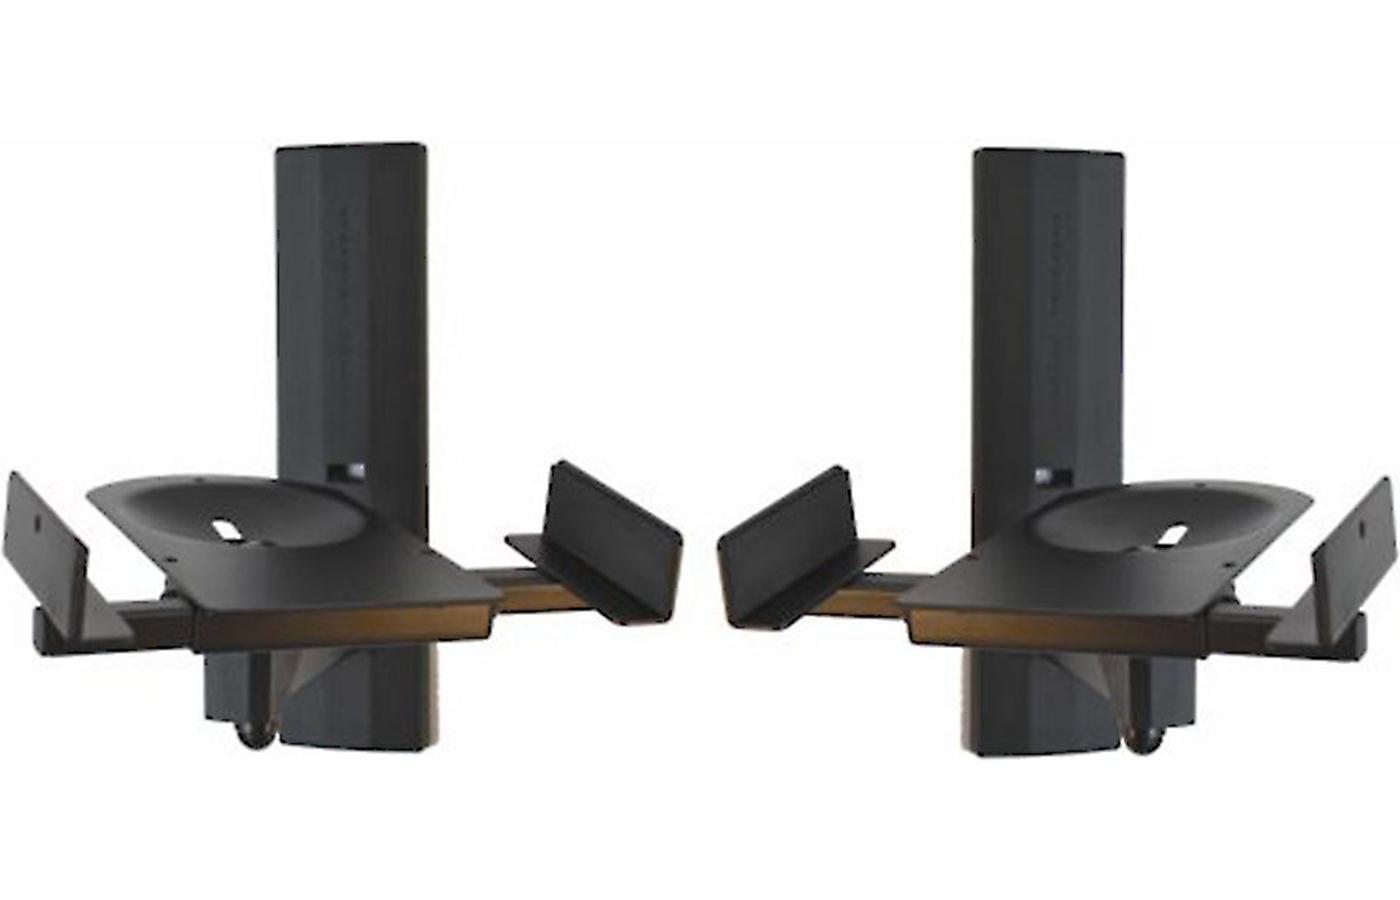 Pinpoint Am 41 Side Clamping Bookshelf Speaker Wall Mounts Pair